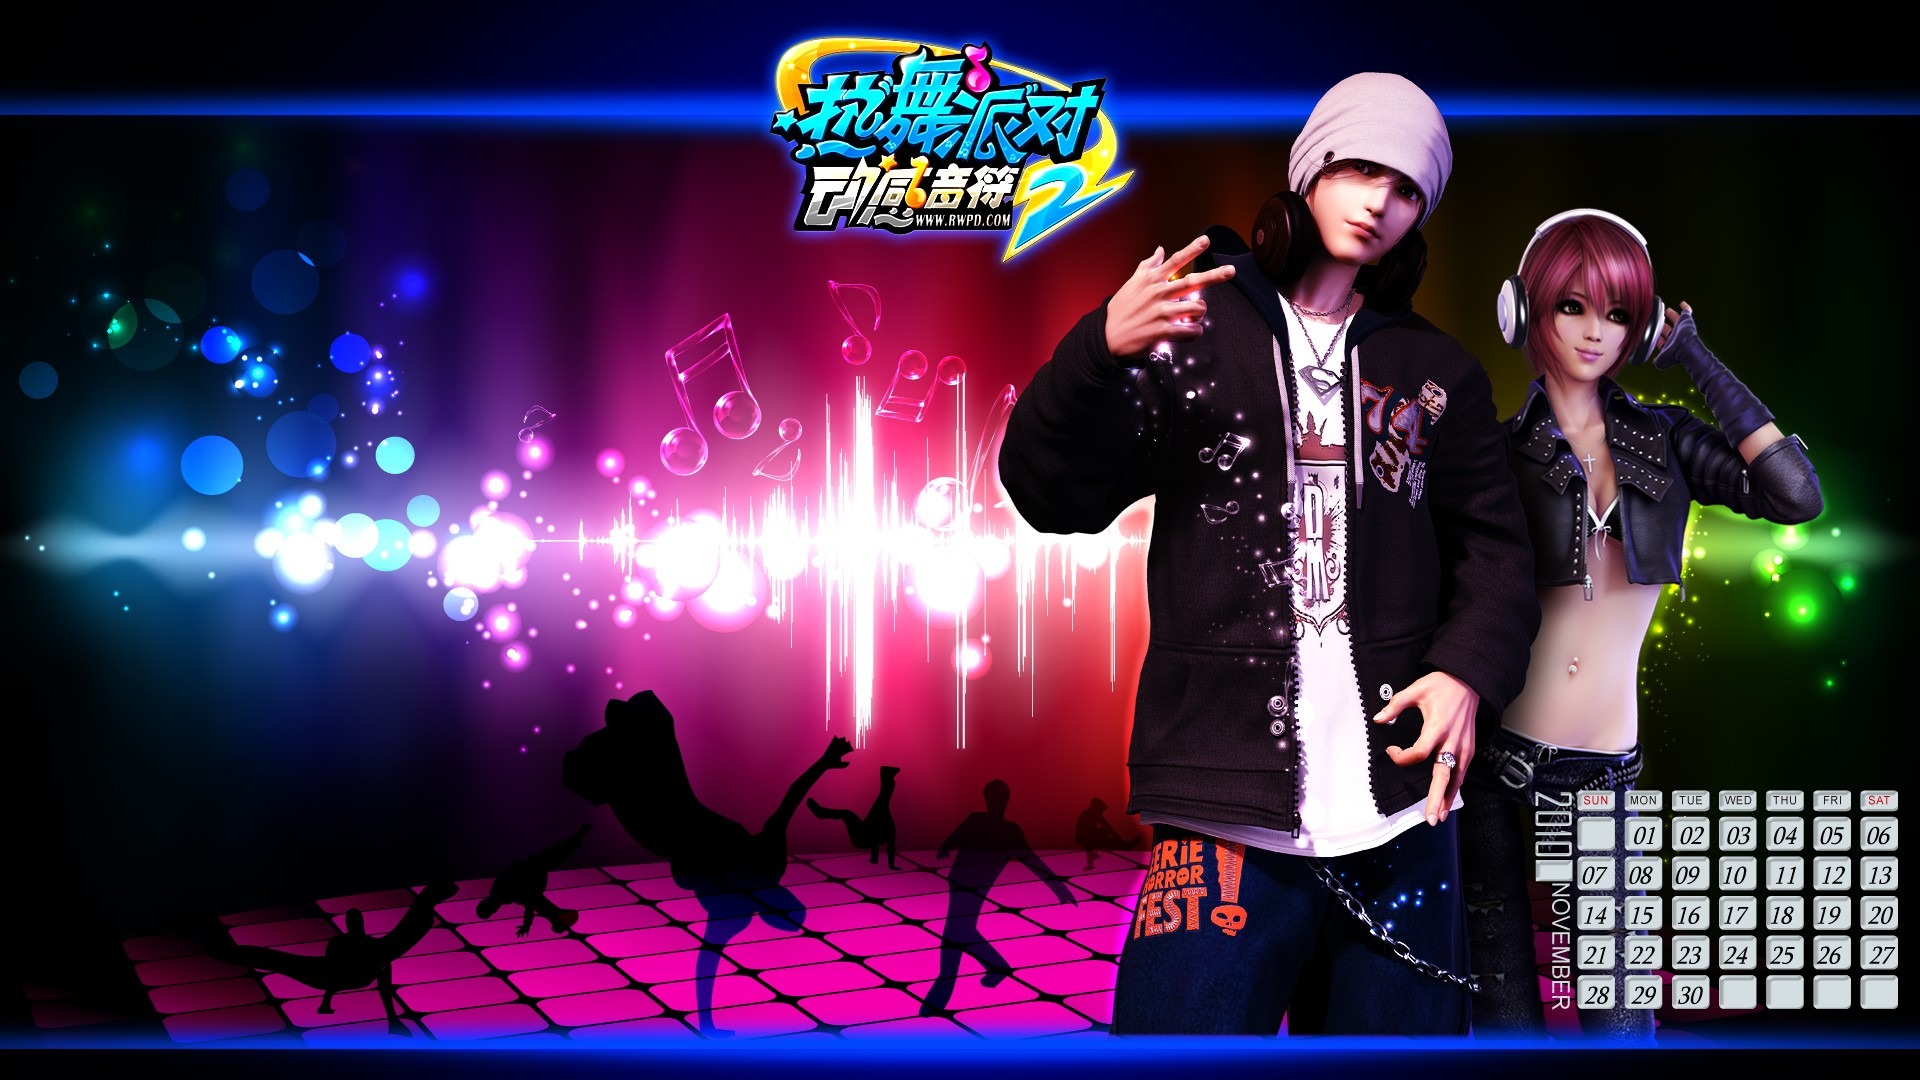 Online game Hot Dance Party II official wallpapers #35 - 1920x1080